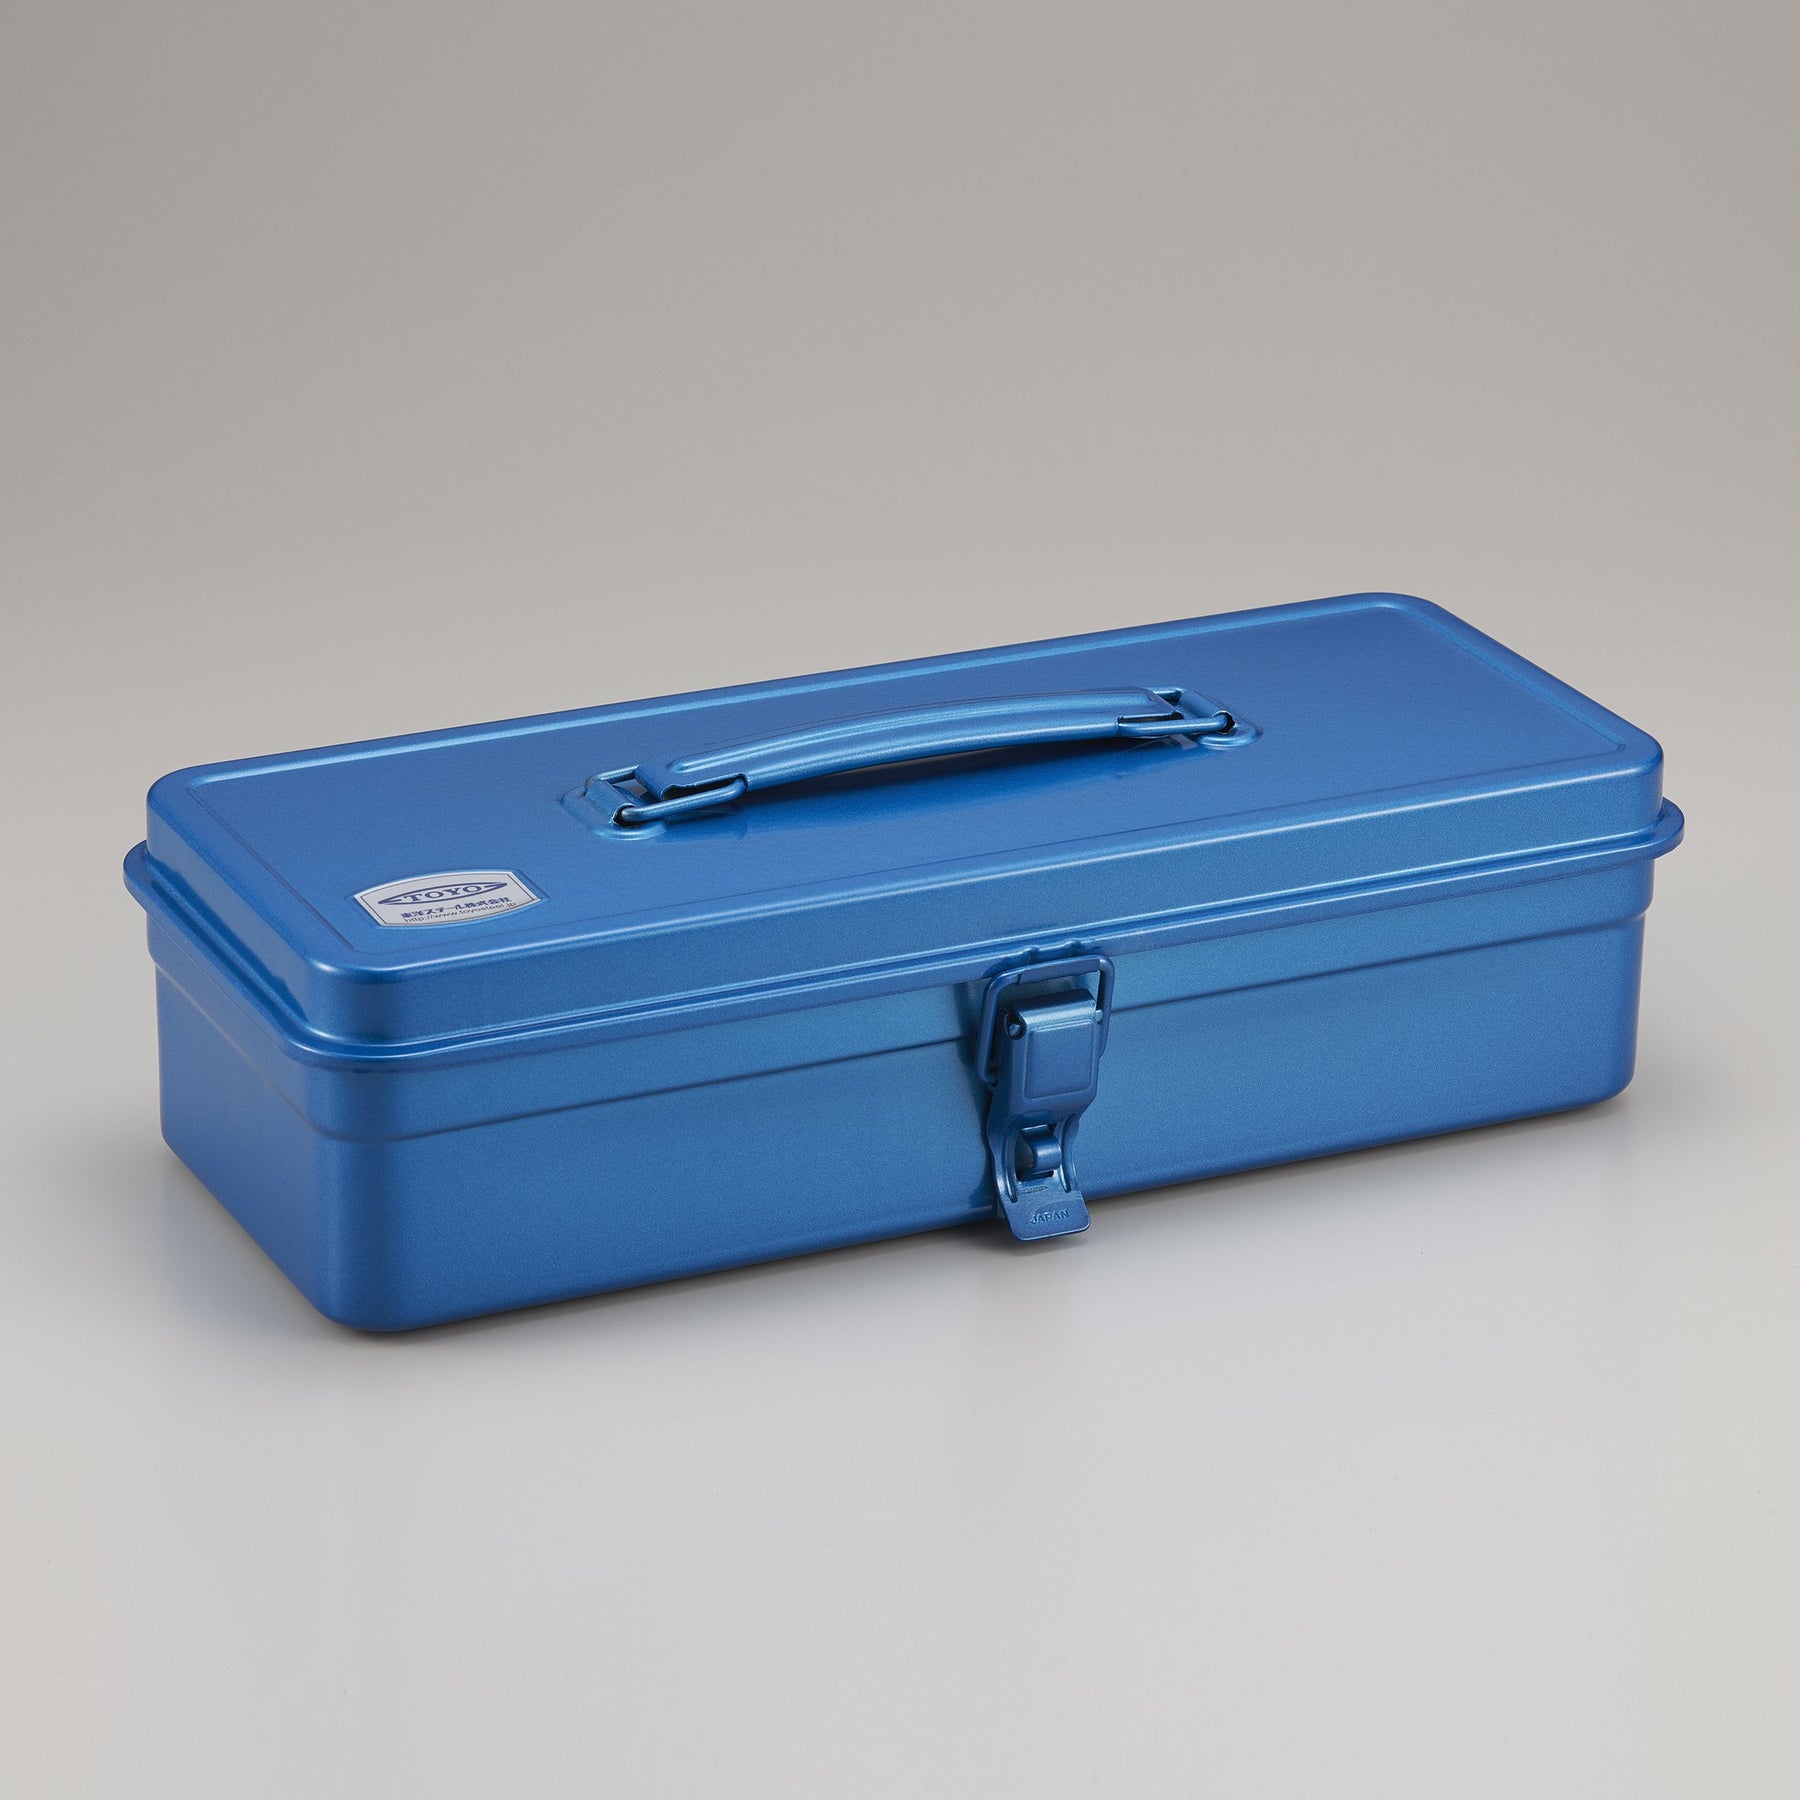 AMEICO - Official US Distributor of Toyo - Steel Toolbox T-320